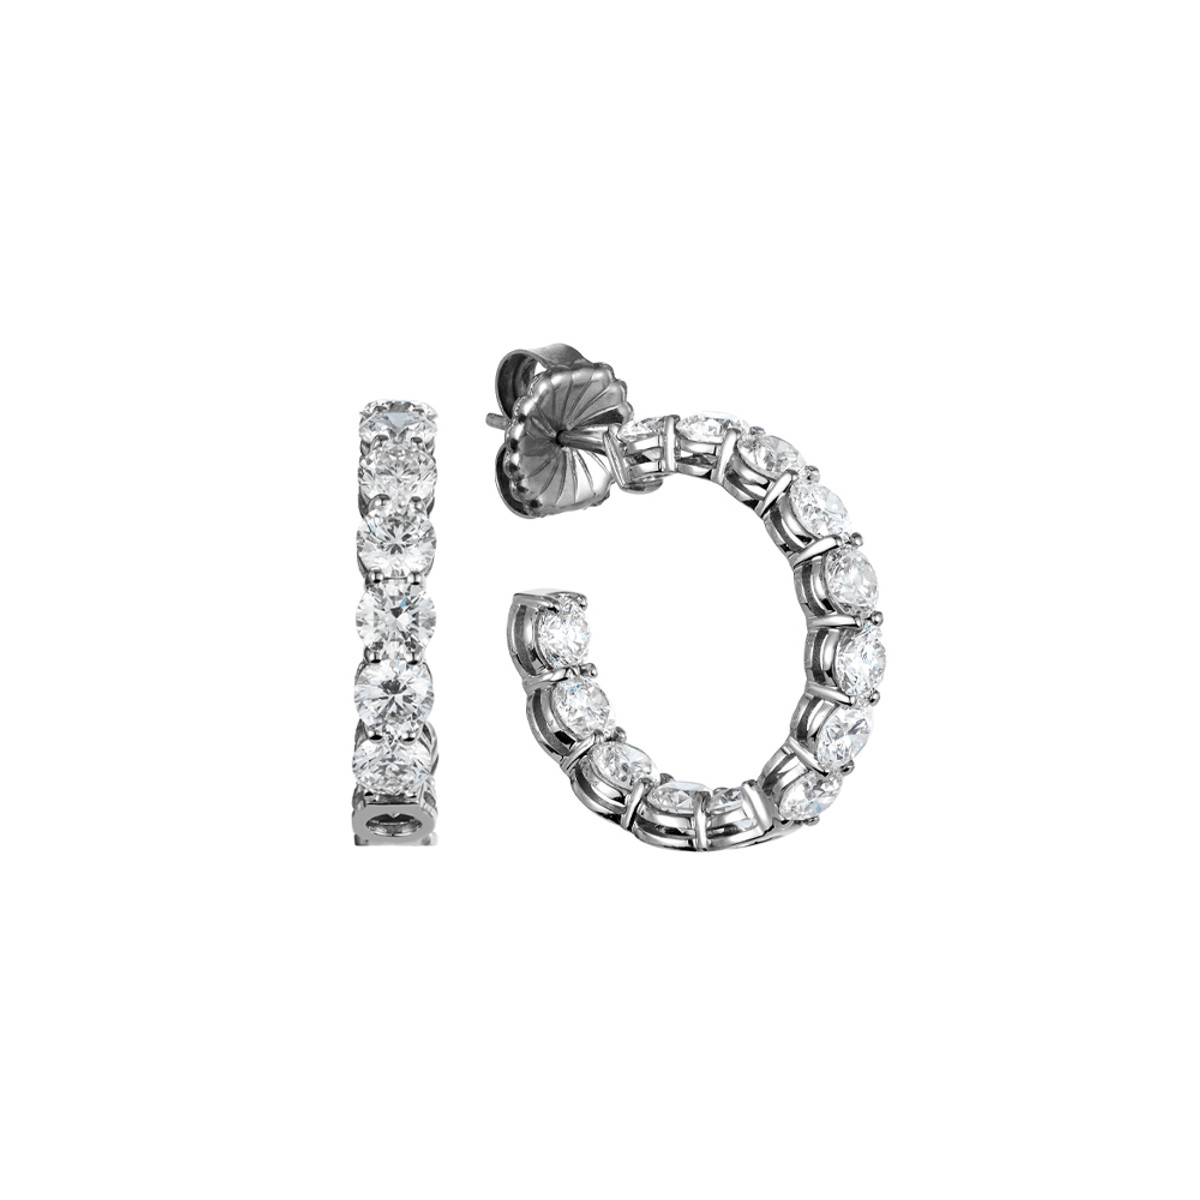 18k White Gold 8.09ct Round Diamond Hoop Earrings-35659 Product Image